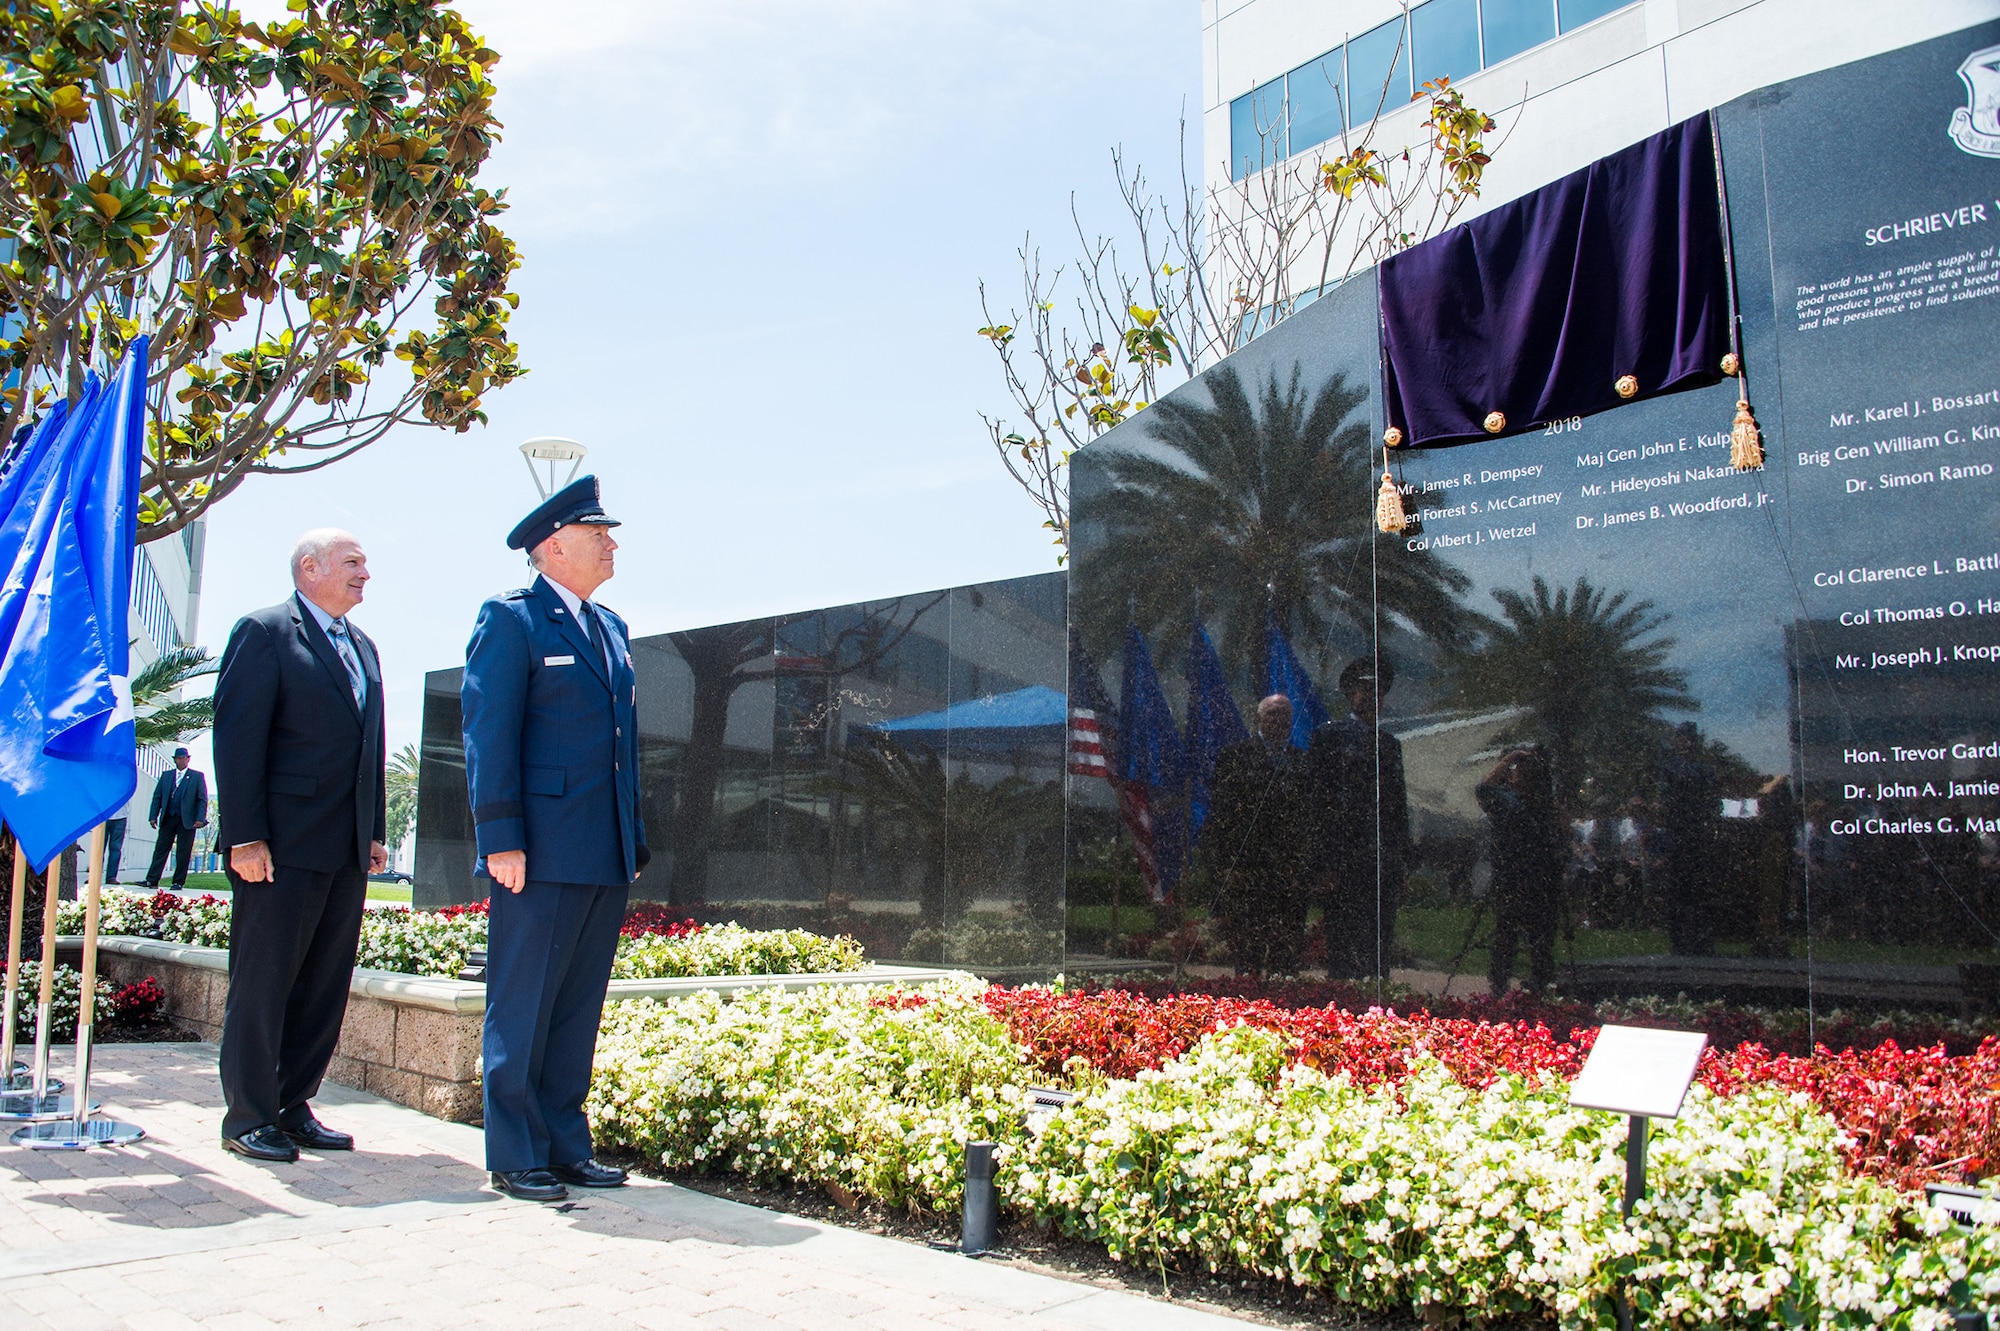 Lt. Gen. John Thompson, commander of the Space and Missile Systems Center, and retired Maj. Gen. Thomas Taverney, chairman of the board of the Schriever chapter of the Air Force Association and former vice commander of Air Force Space Command, watch as six newly inscribed names of Air Force and civilian space pioneers are revealed during the 2018 Schriever Wall of Honor induction ceremony at Los Angeles Air Force Base in El Segundo, California, May 14, 2018. (U.S. Air Force photo/Van De Ha)